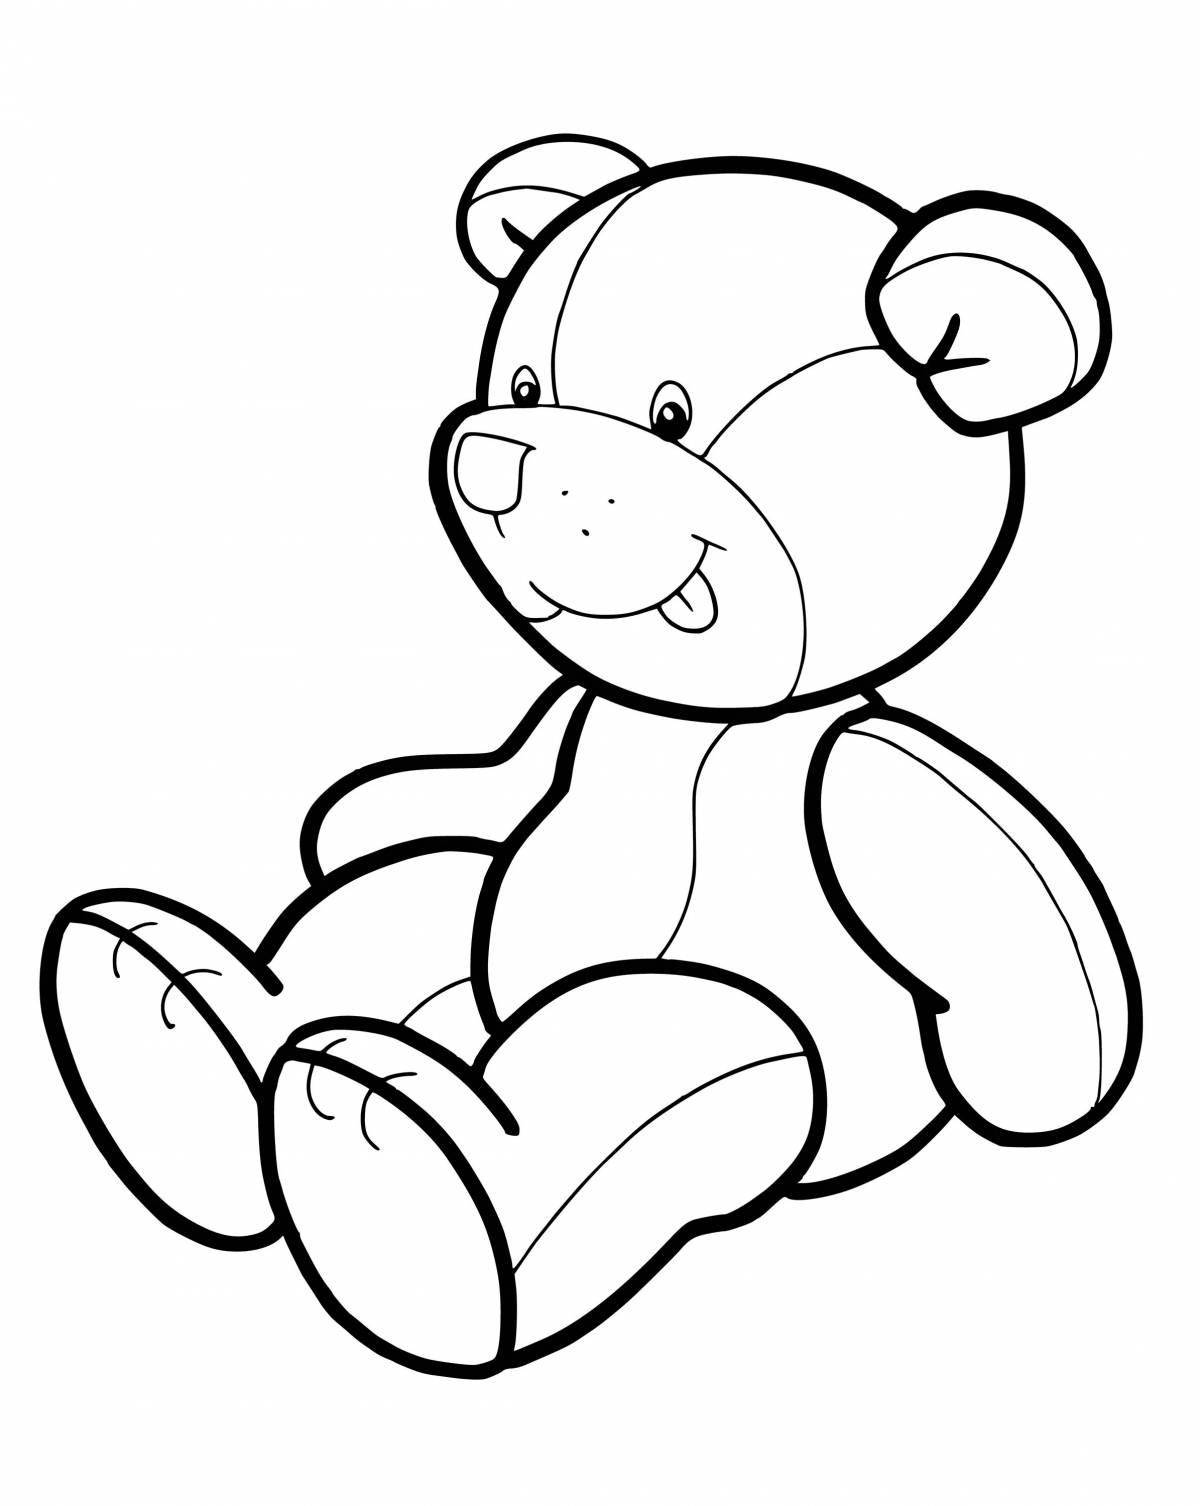 Colorful bear toy coloring book